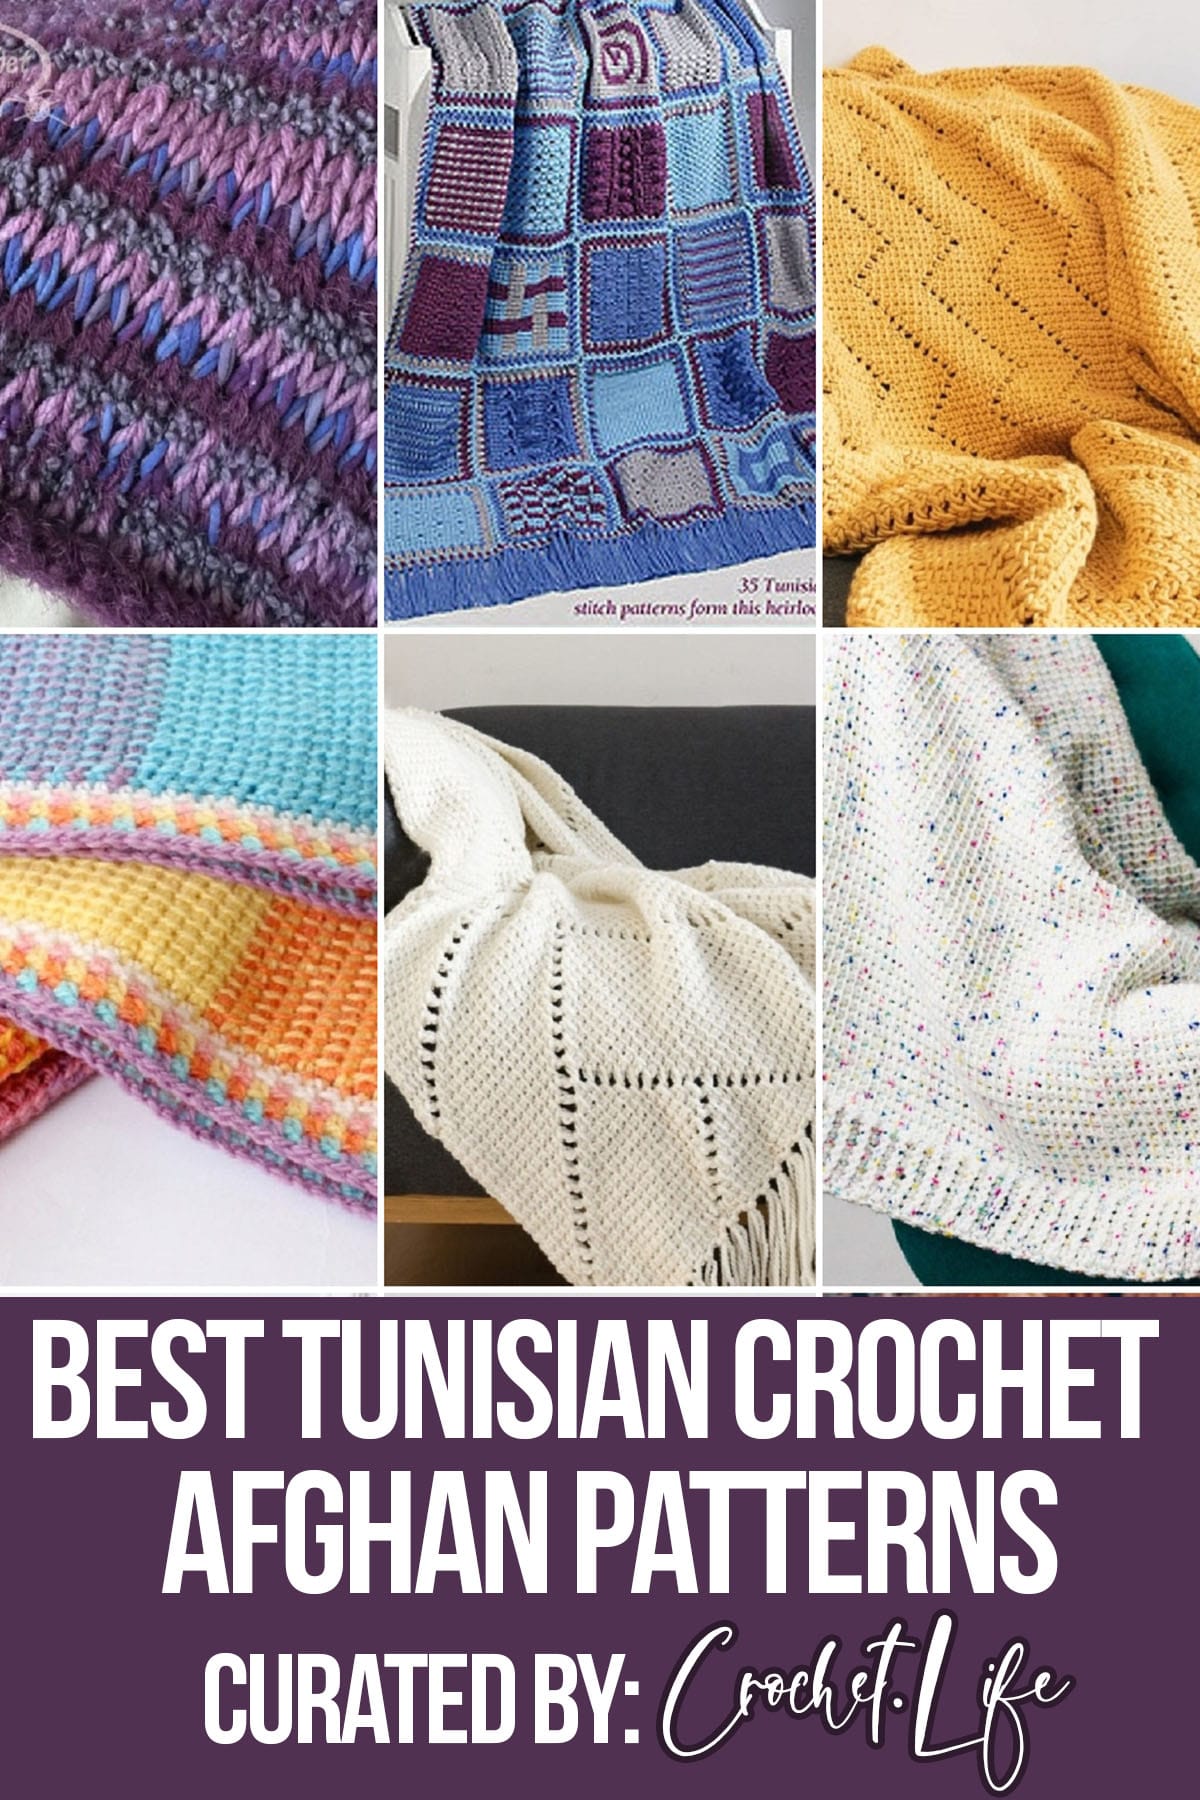 photo collage of crochet blankets made with tunisian crochet with text which reads best tunisian crochet afghan patterns curated by crochet.life